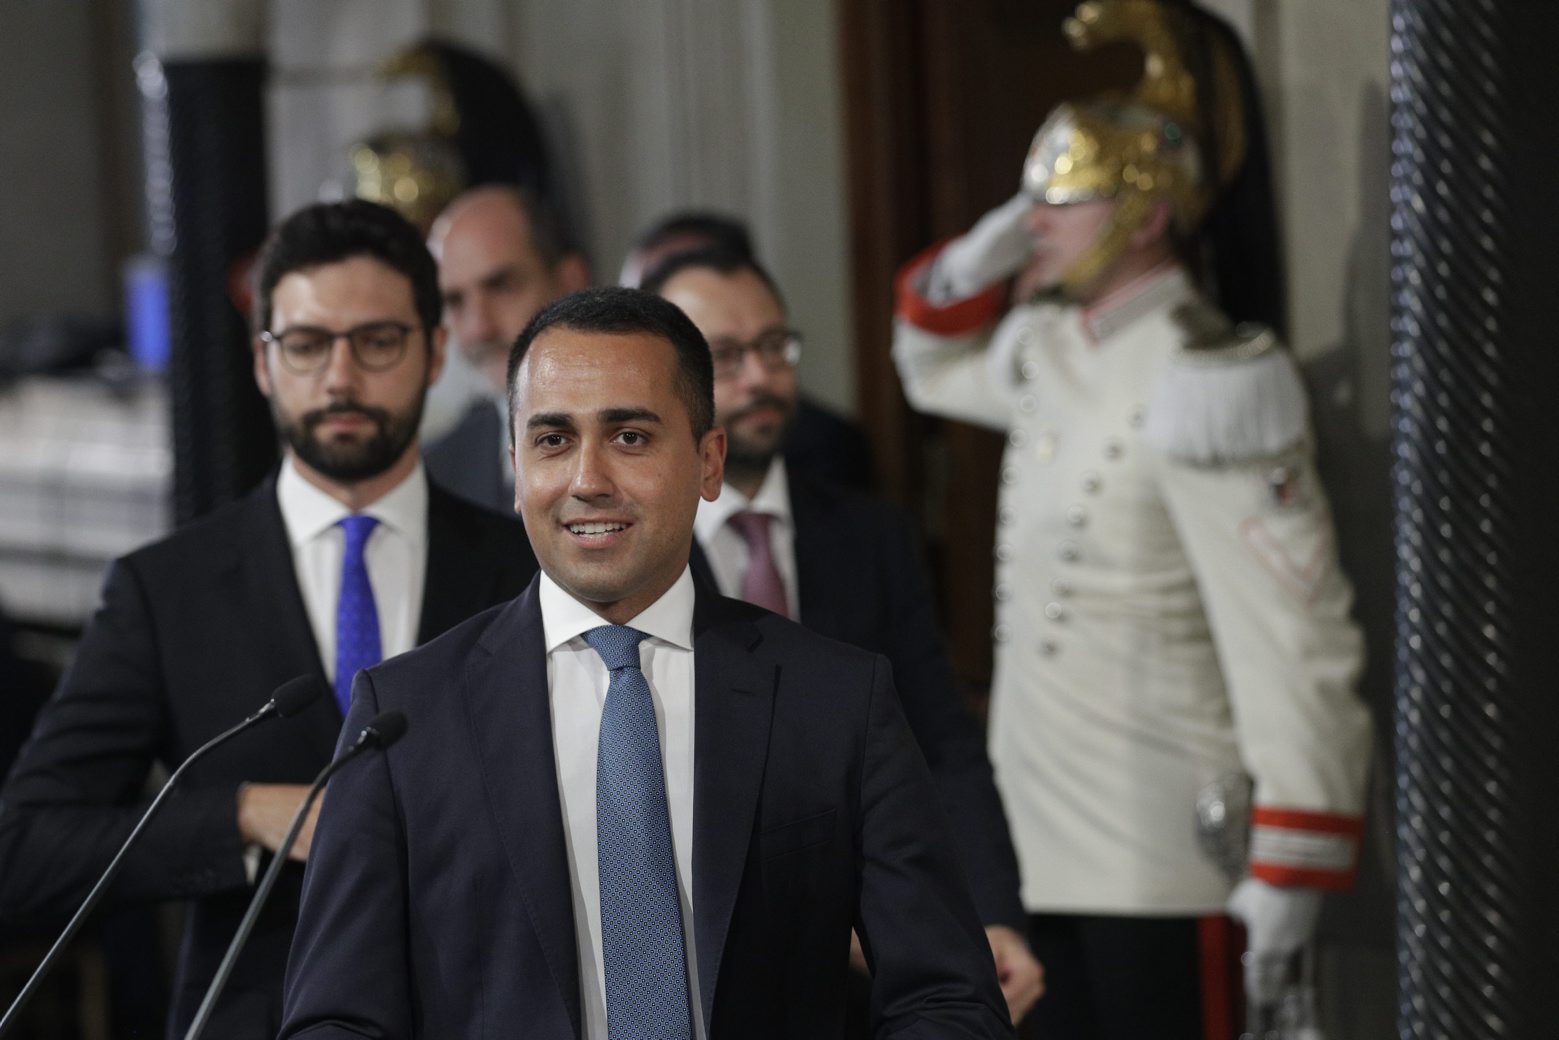 Leader of Five-Star Movement, Luigi Di Maio, leaves after meeting with Italian President Sergio Mattarella at Rome's Quirinale presidential palace, Wednesday, Aug. 28, 2019. Mattarella continued receiving political leaders to explore if a solid majority with staying power exists in Parliament for a new government that could win the required confidence vote. (AP Photo/Andrew Medichini) Italy Politics